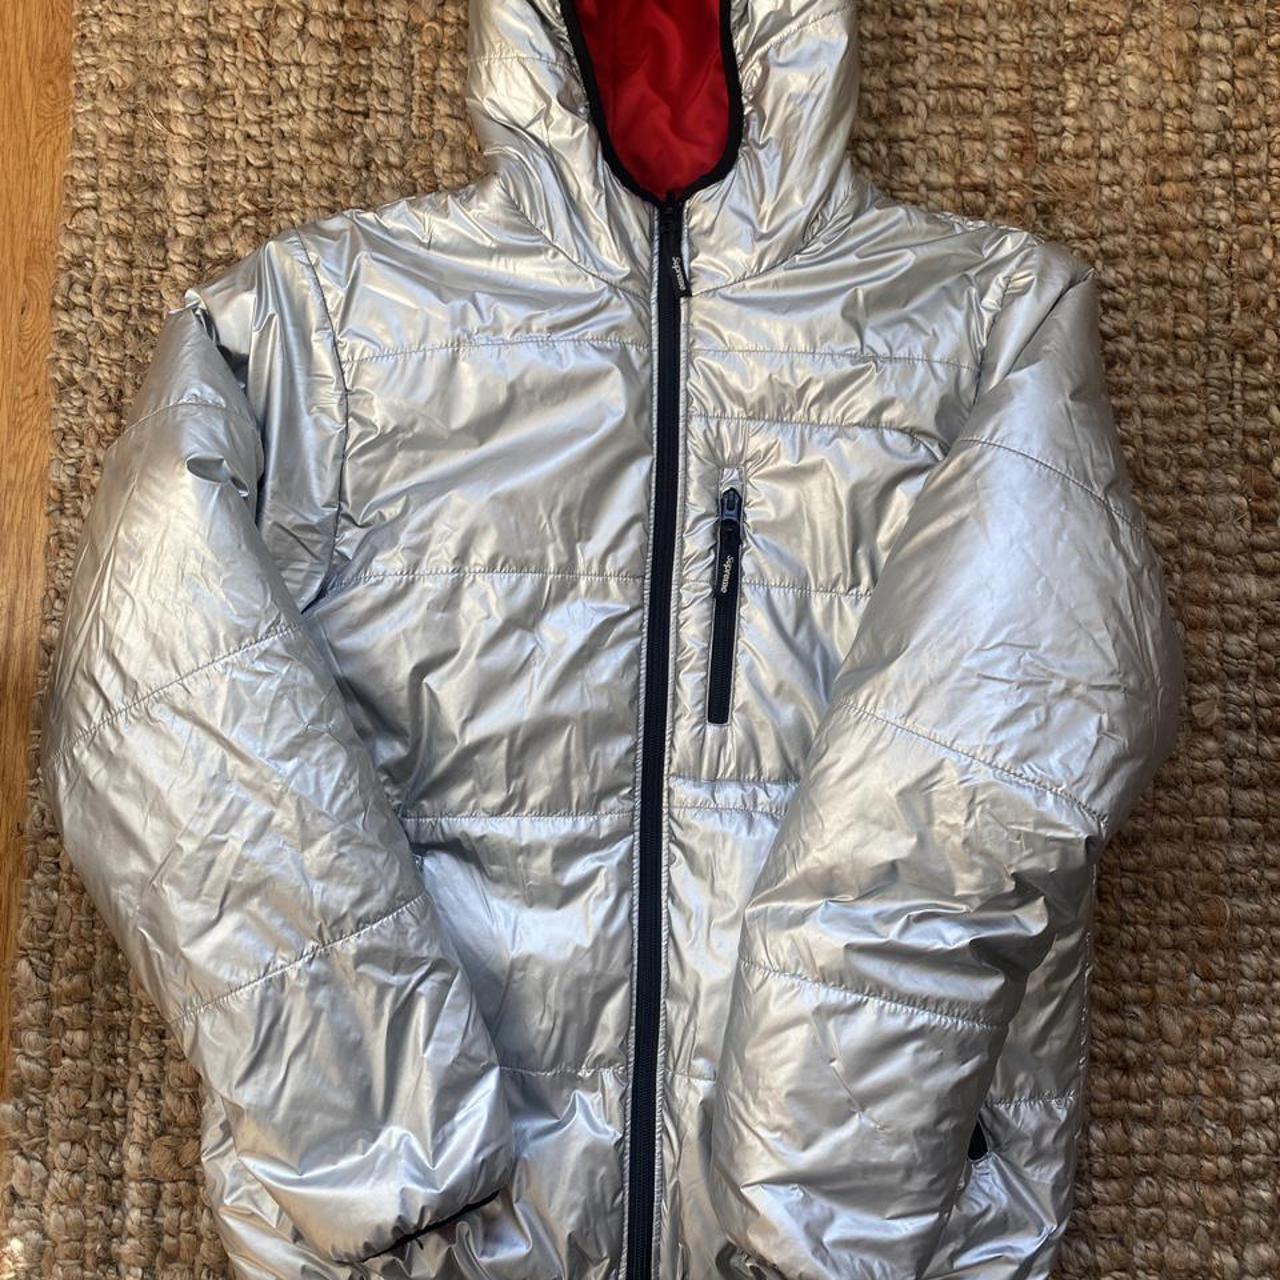 Supreme reversible puffer jacket silver and red.... - Depop